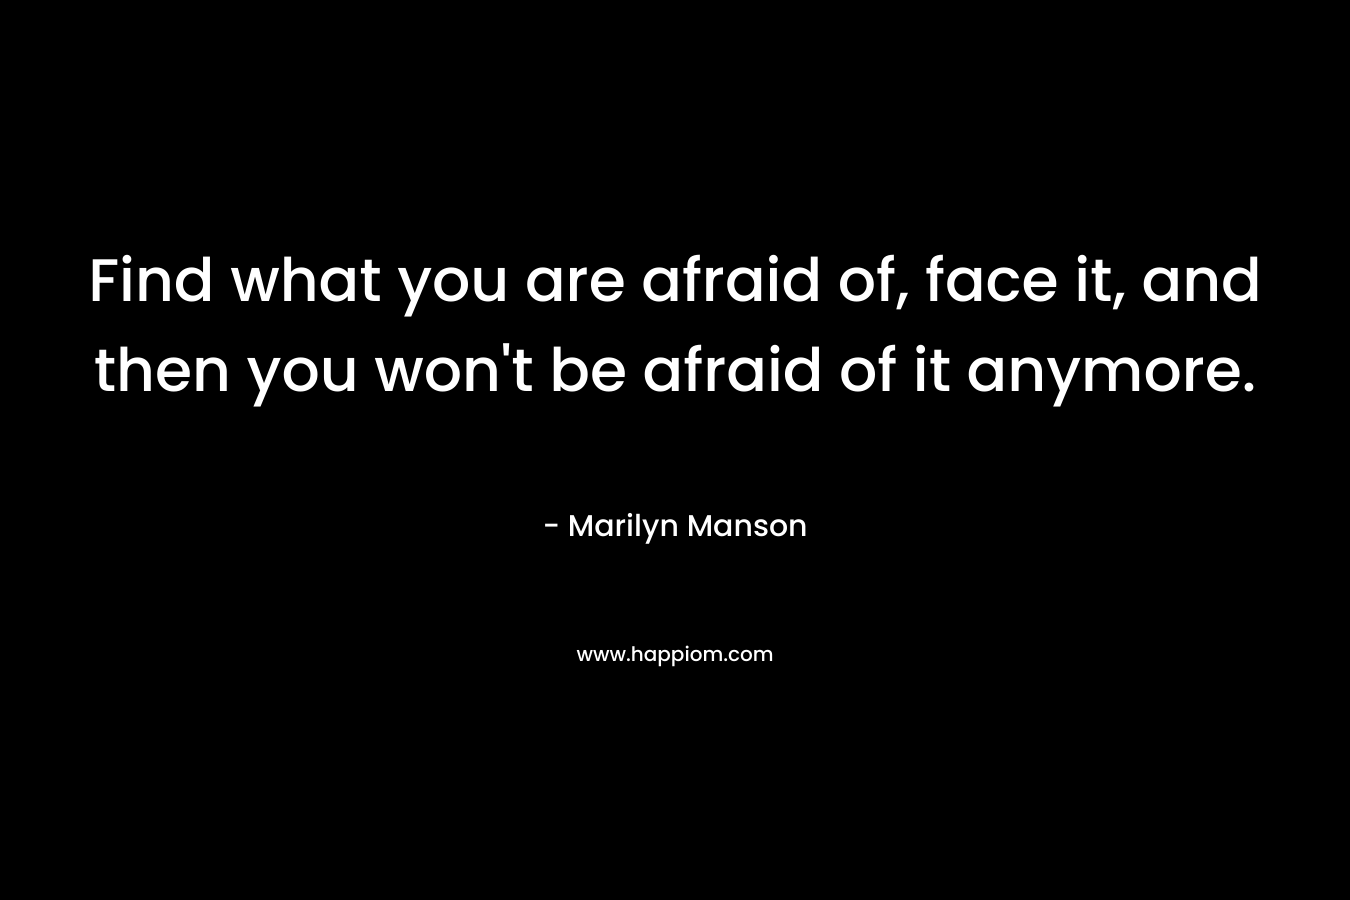 Find what you are afraid of, face it, and then you won’t be afraid of it anymore. – Marilyn Manson